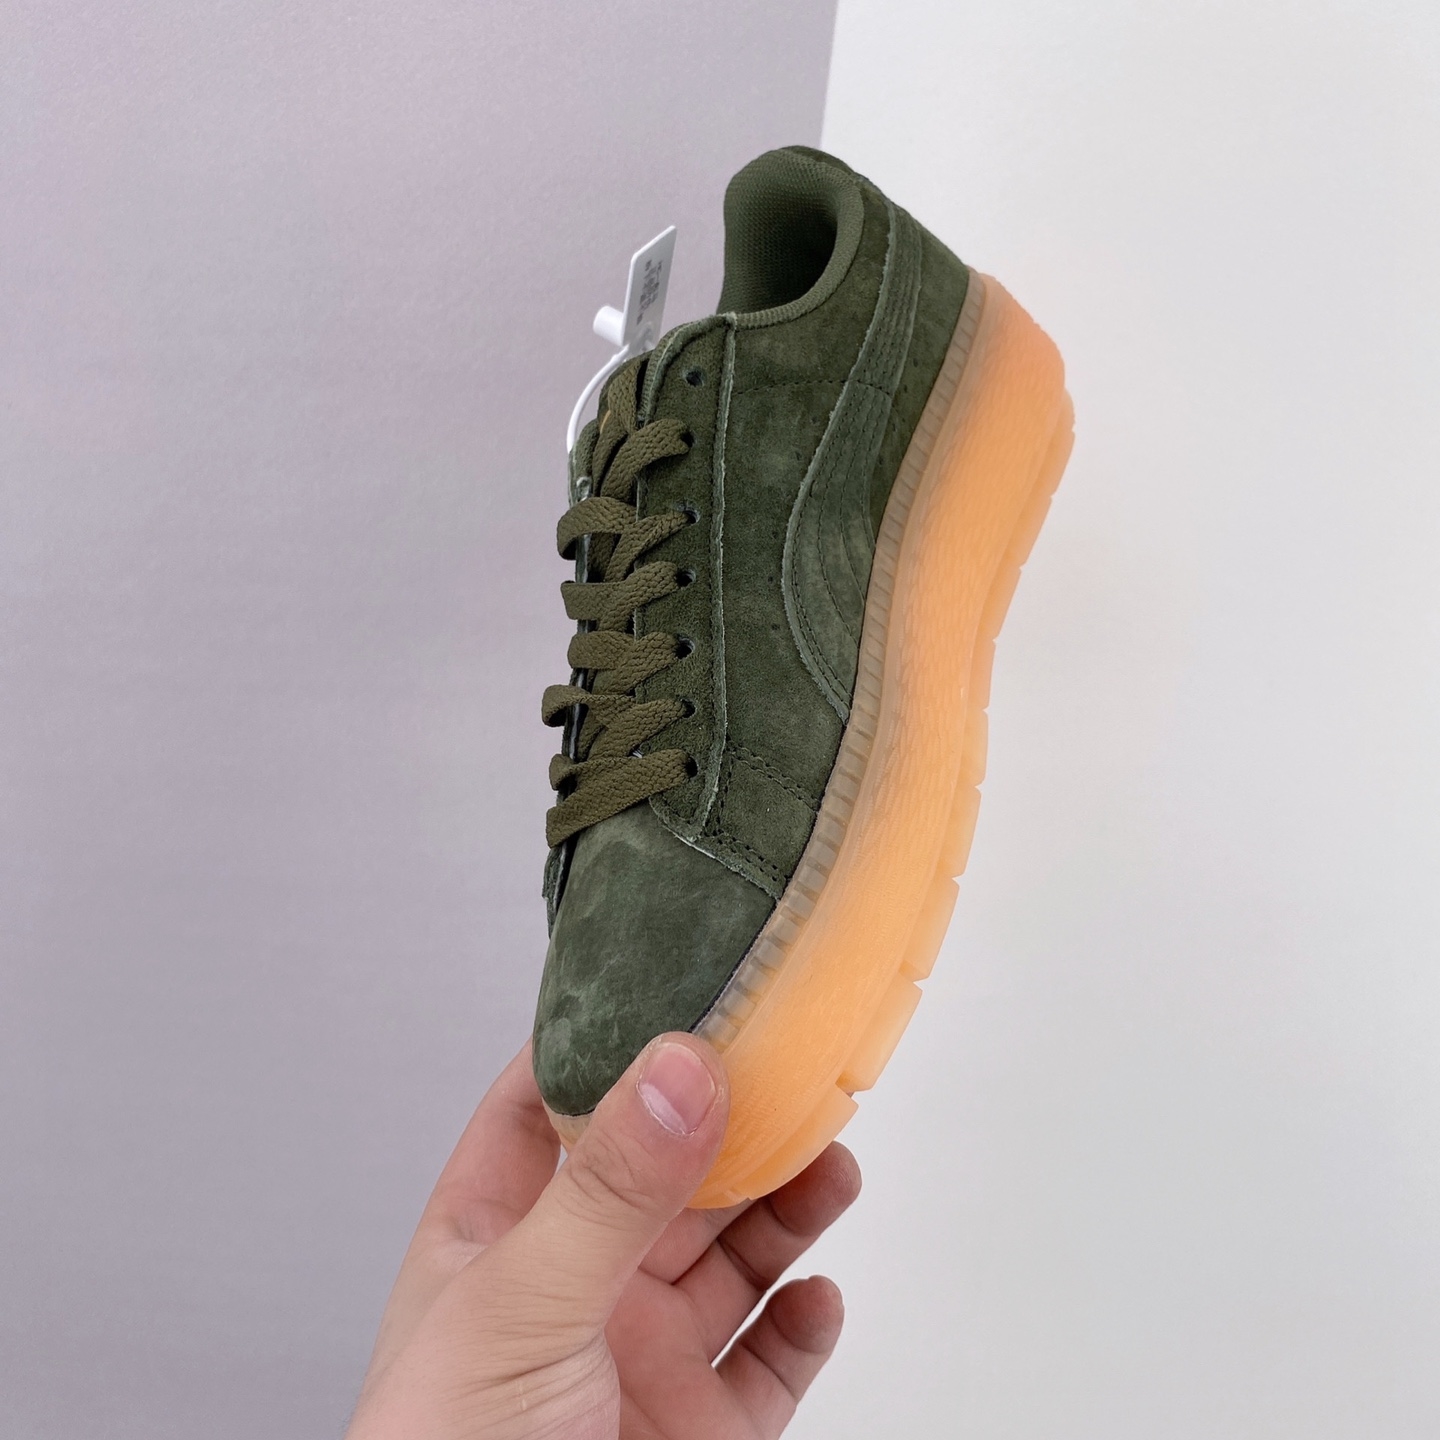 PUMA Suede Platform Trace Olive Night: Shop the Latest Stylish Sneakers